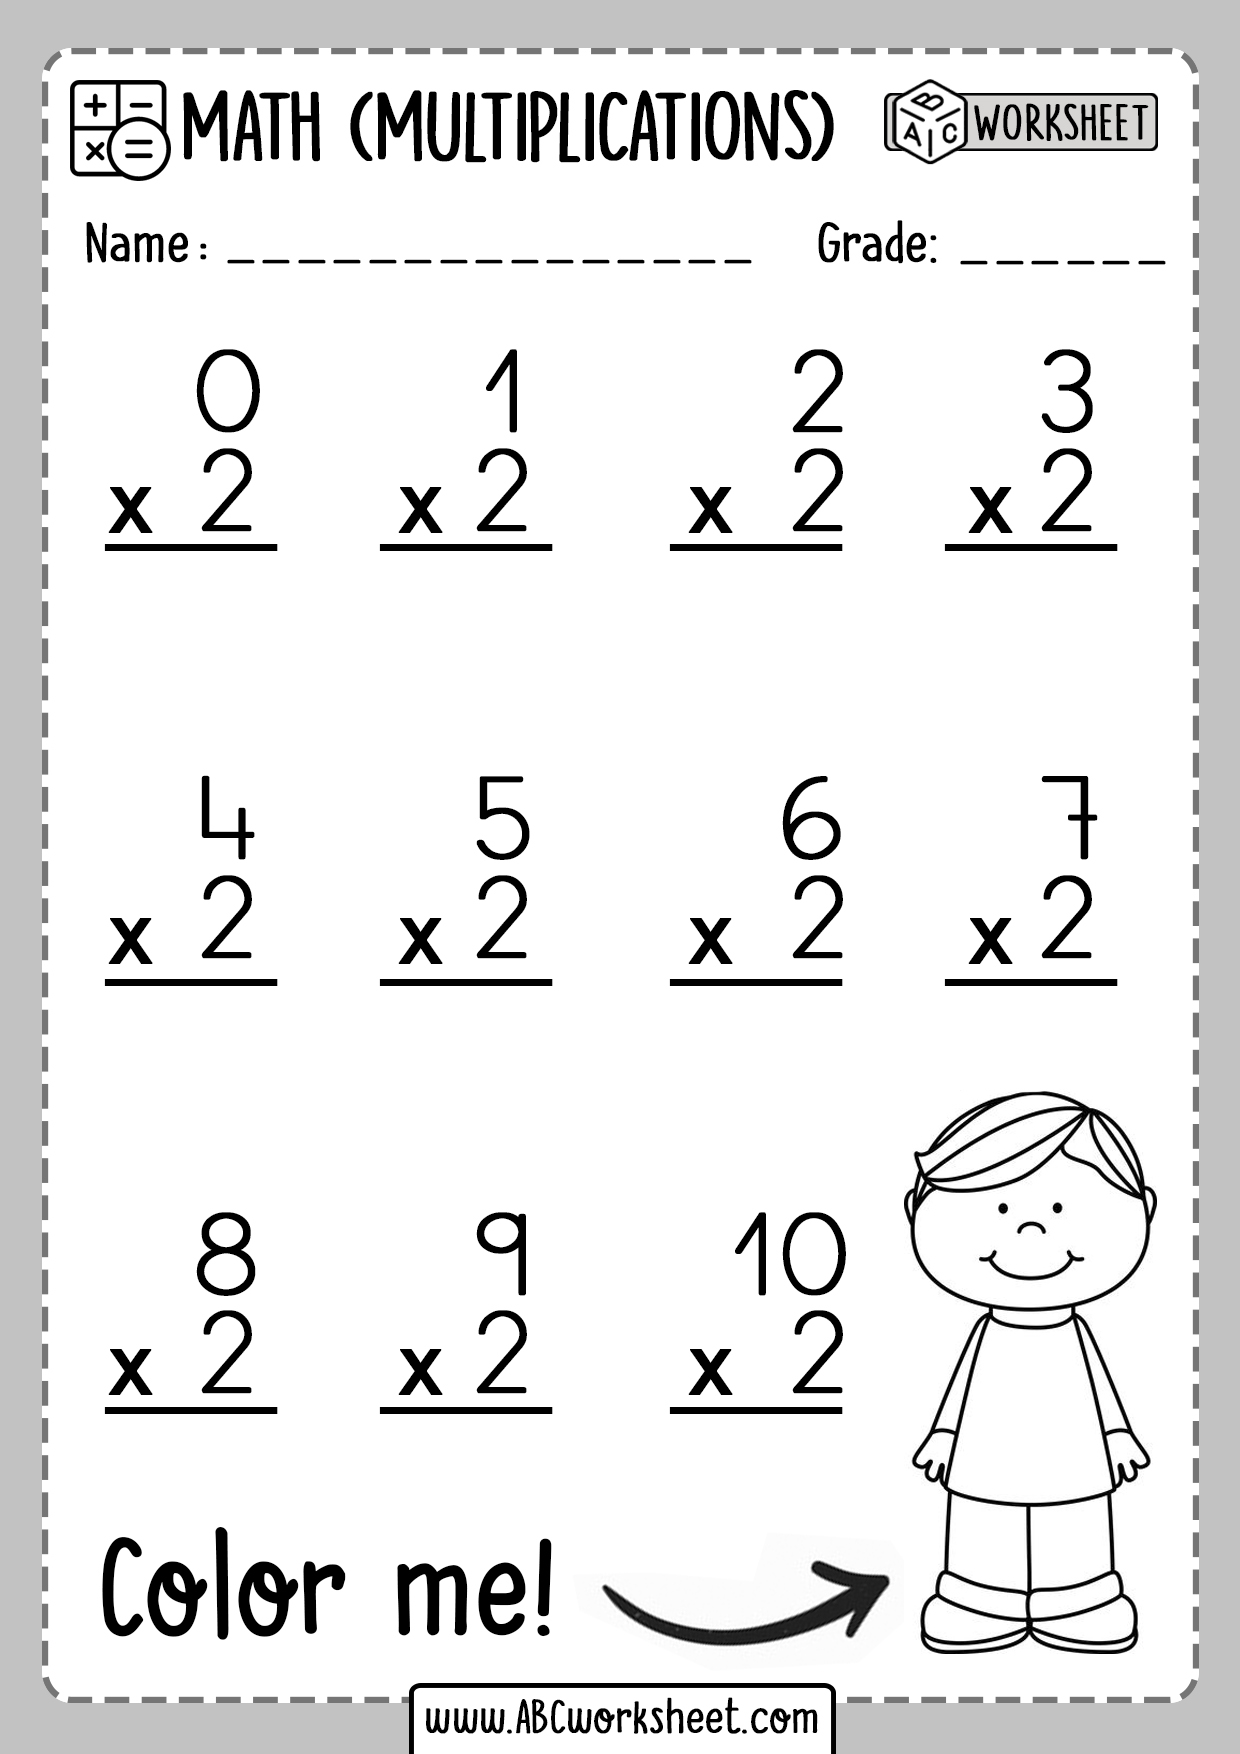 multiplication-tables-1-to-20-2020-printable-calendar-posters-images